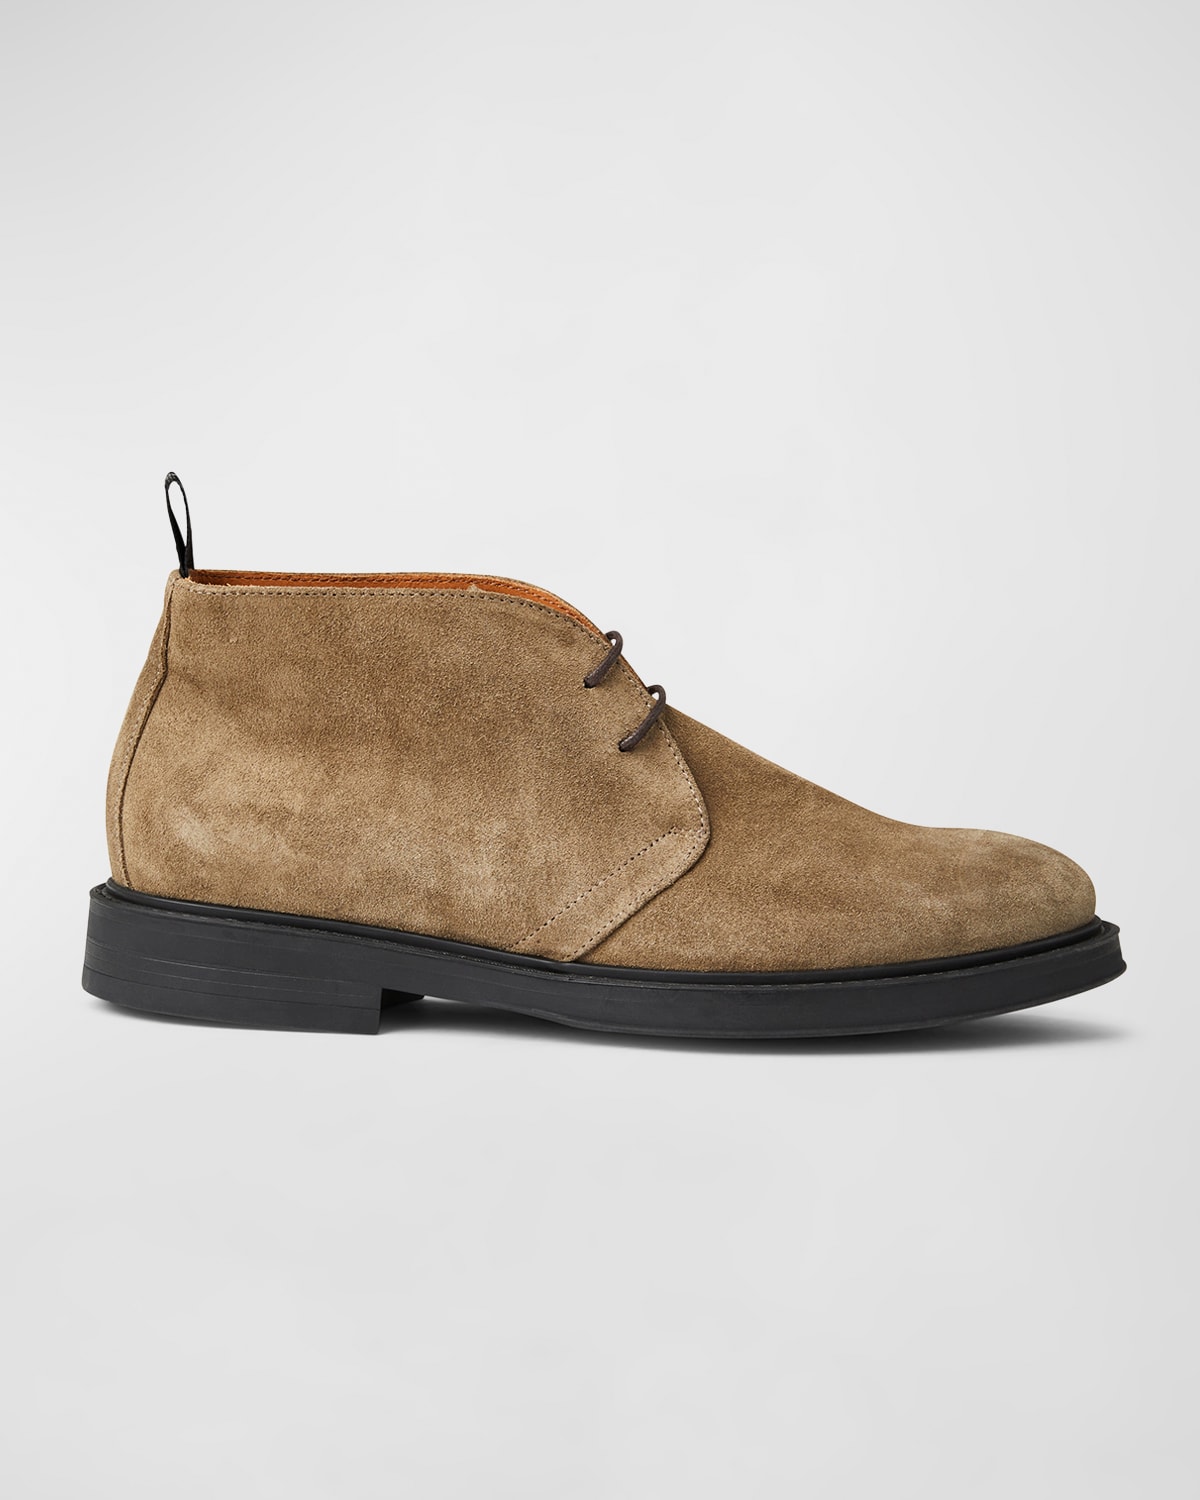 Bruno Magli Men's Taddeo Suede Chukka Boots